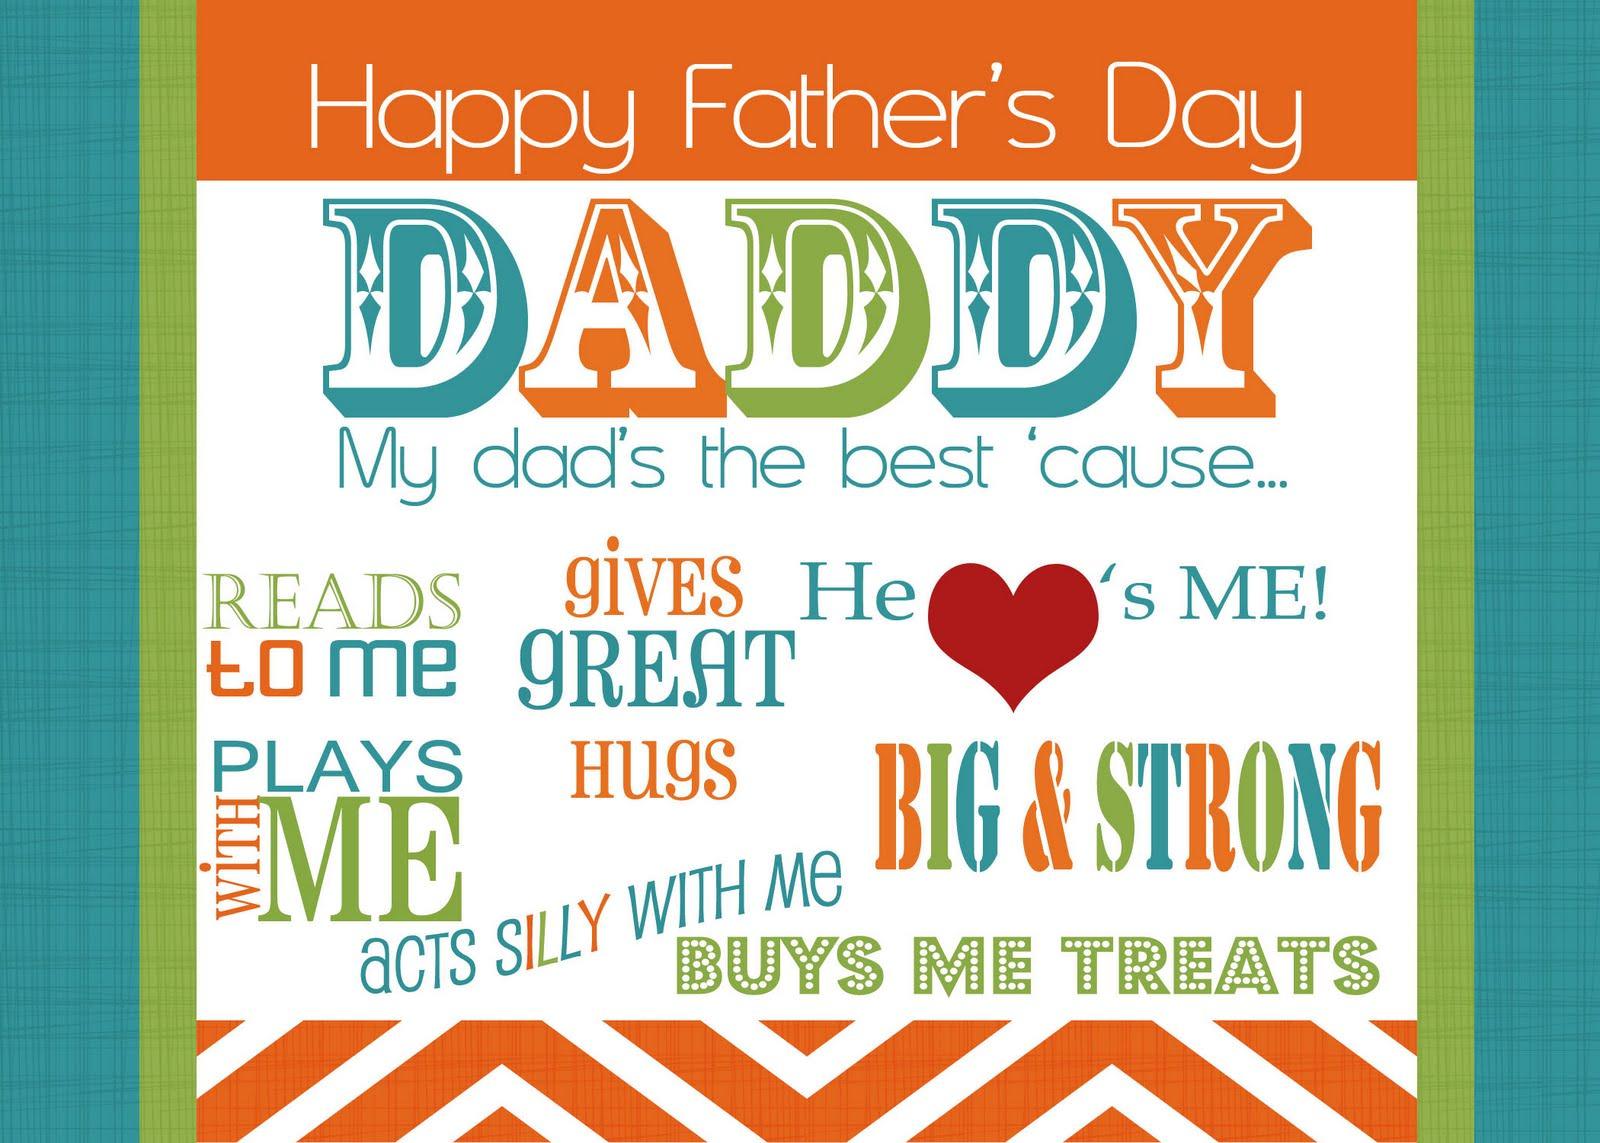 Happy Fathers Day 2014 Wallpaper & Desktop Background